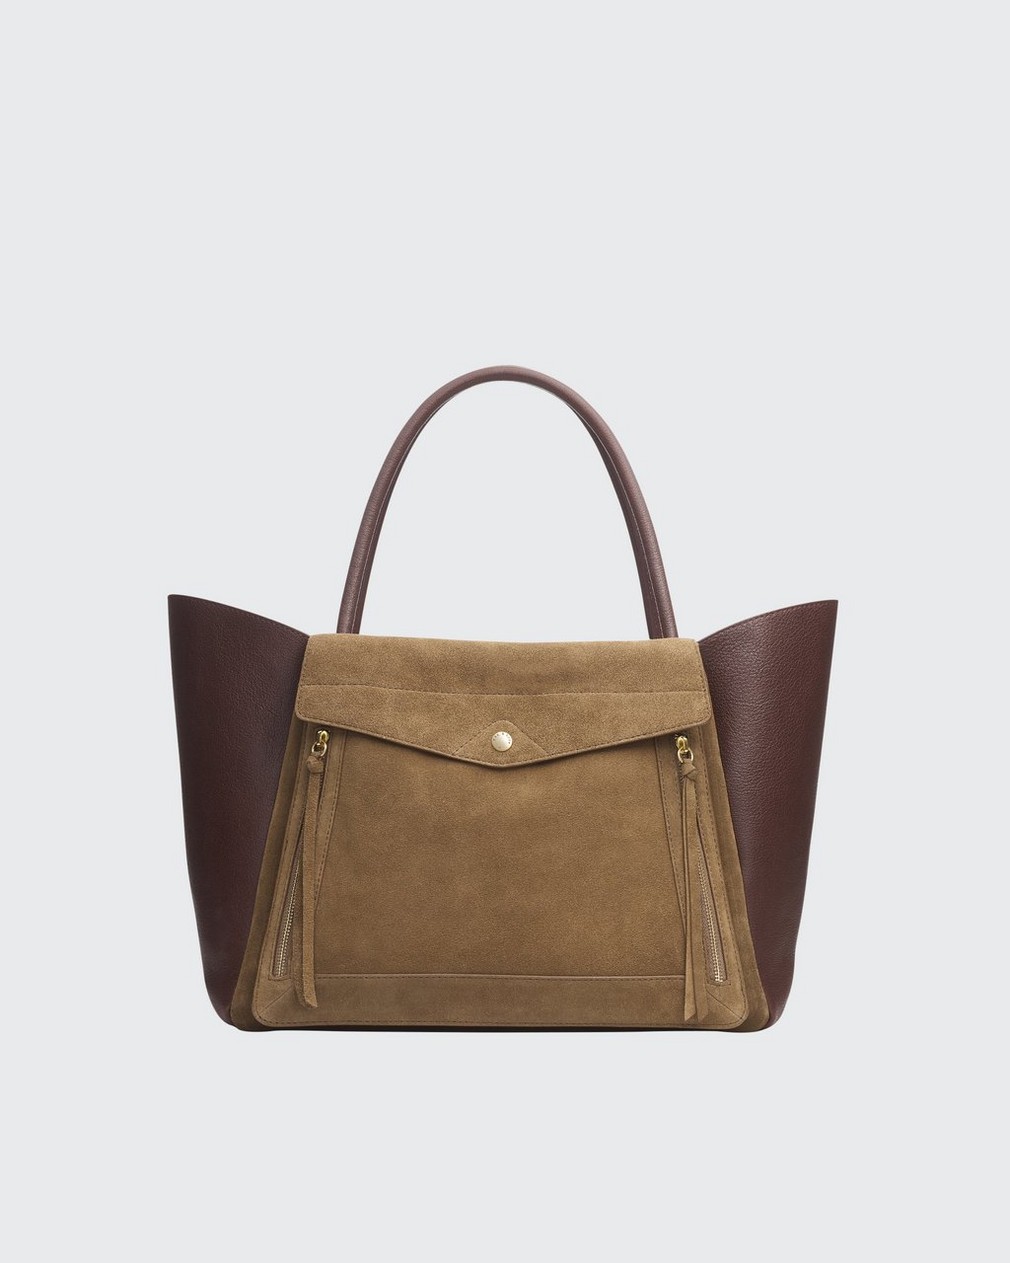 Runner Tote - Suede & Leather